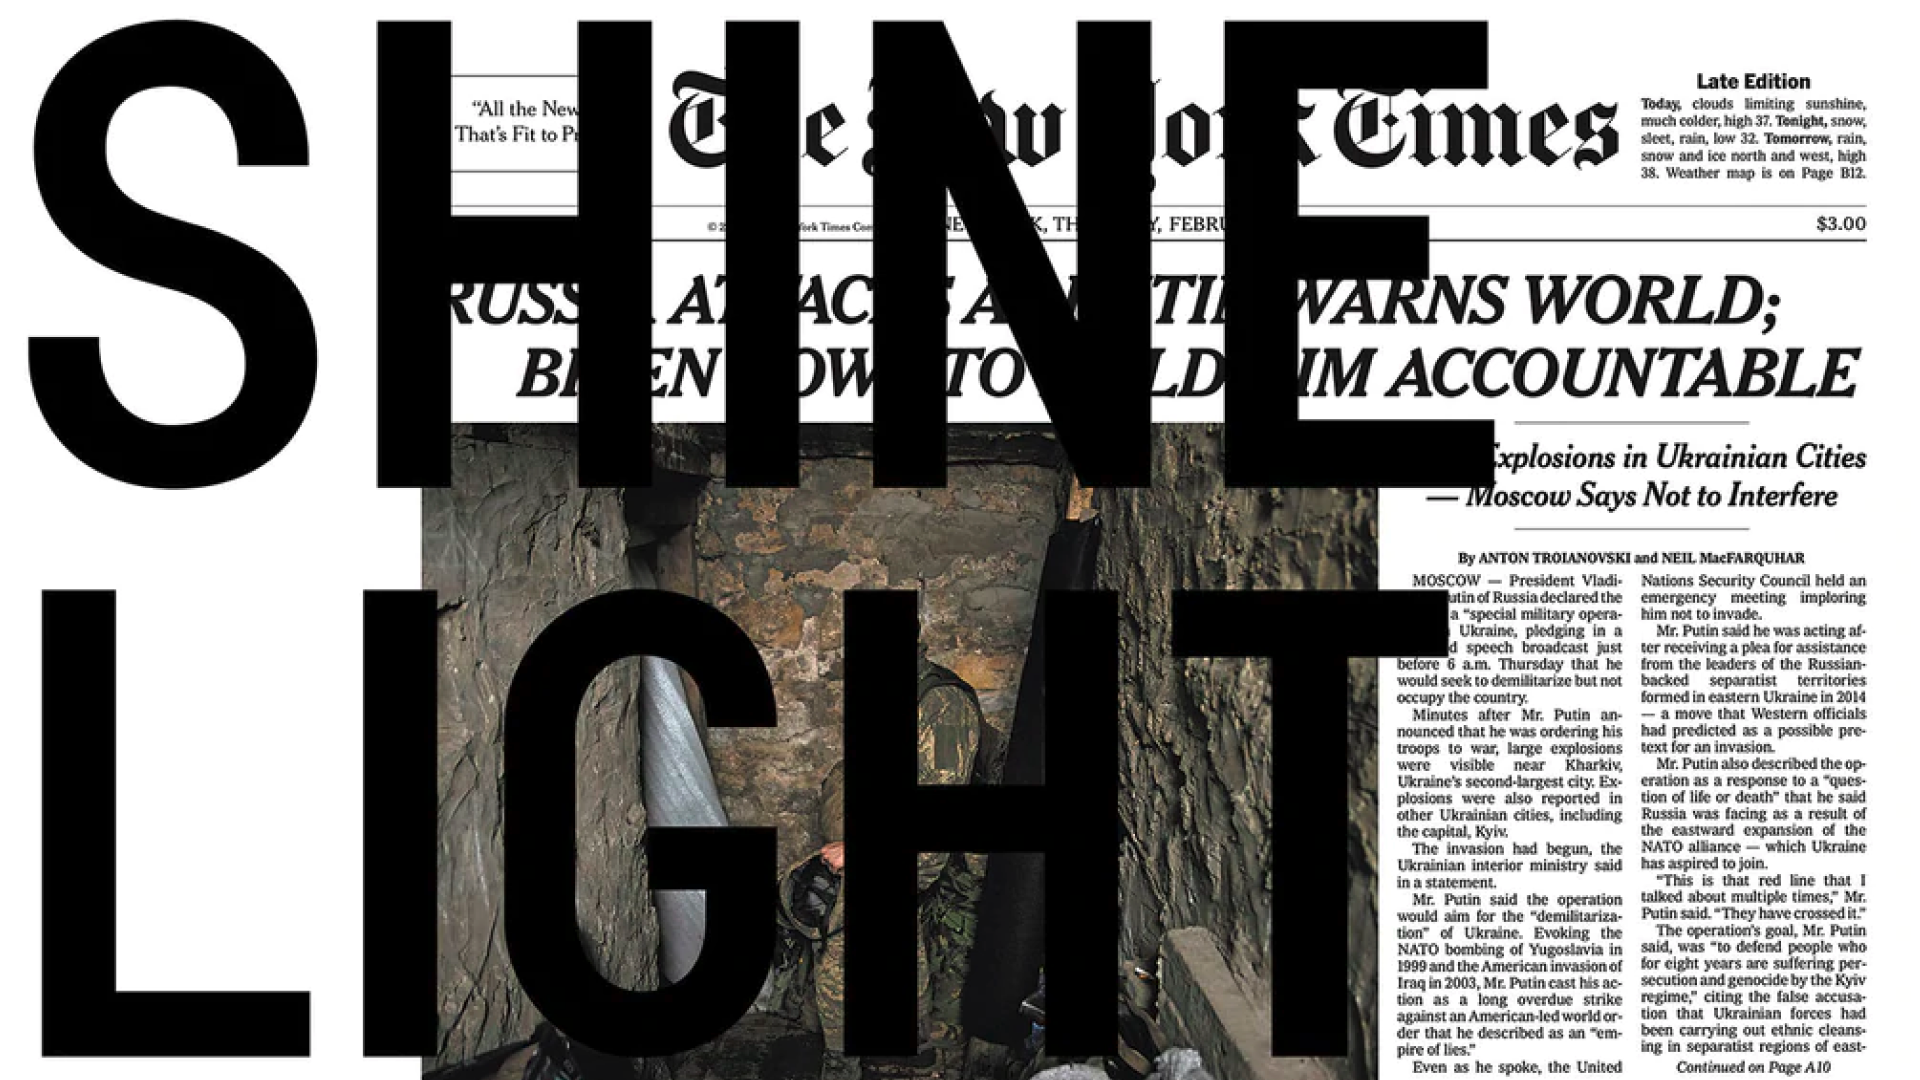 A detail from a print by Rirkrit Tiravanija, titled untitled 2022 (shine light into dark places, new york times, february 24, 2022), dated 2022.